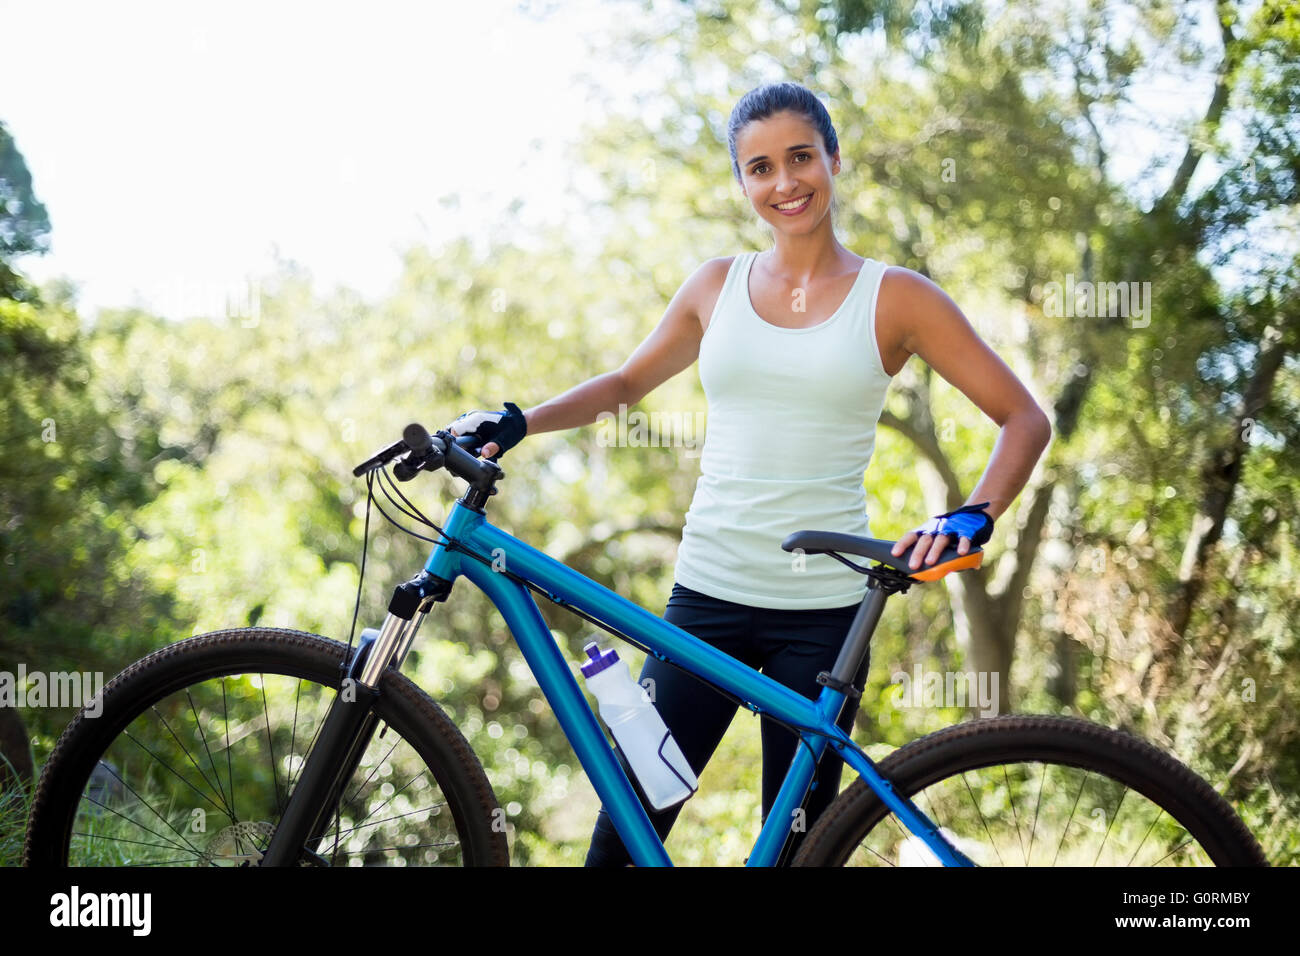 Woman smiling and posing with her bike Stock Photo